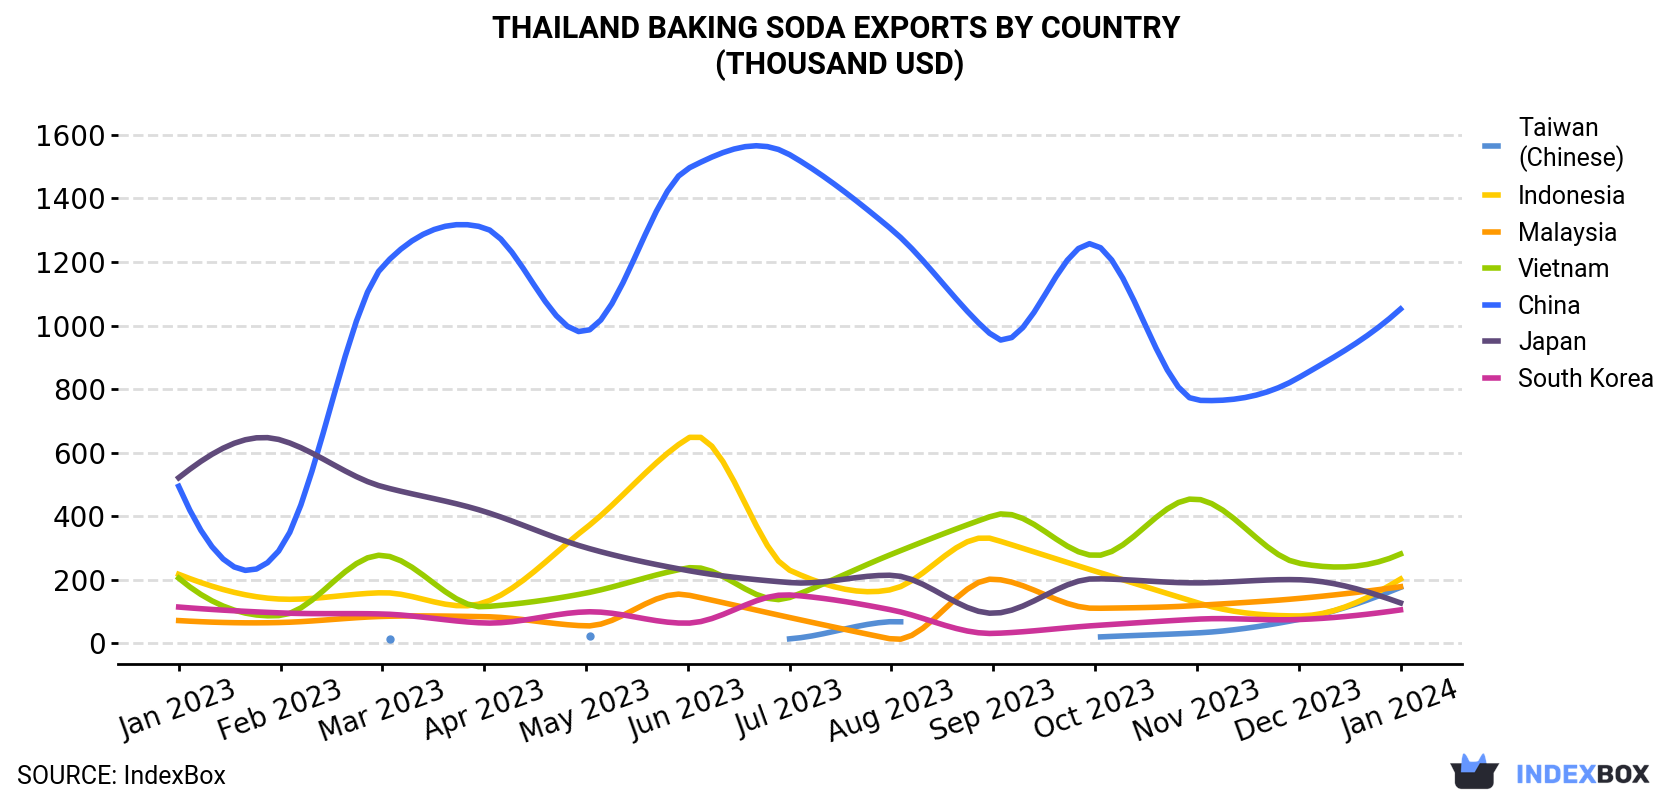 Thailand Baking Soda Exports By Country (Thousand USD)